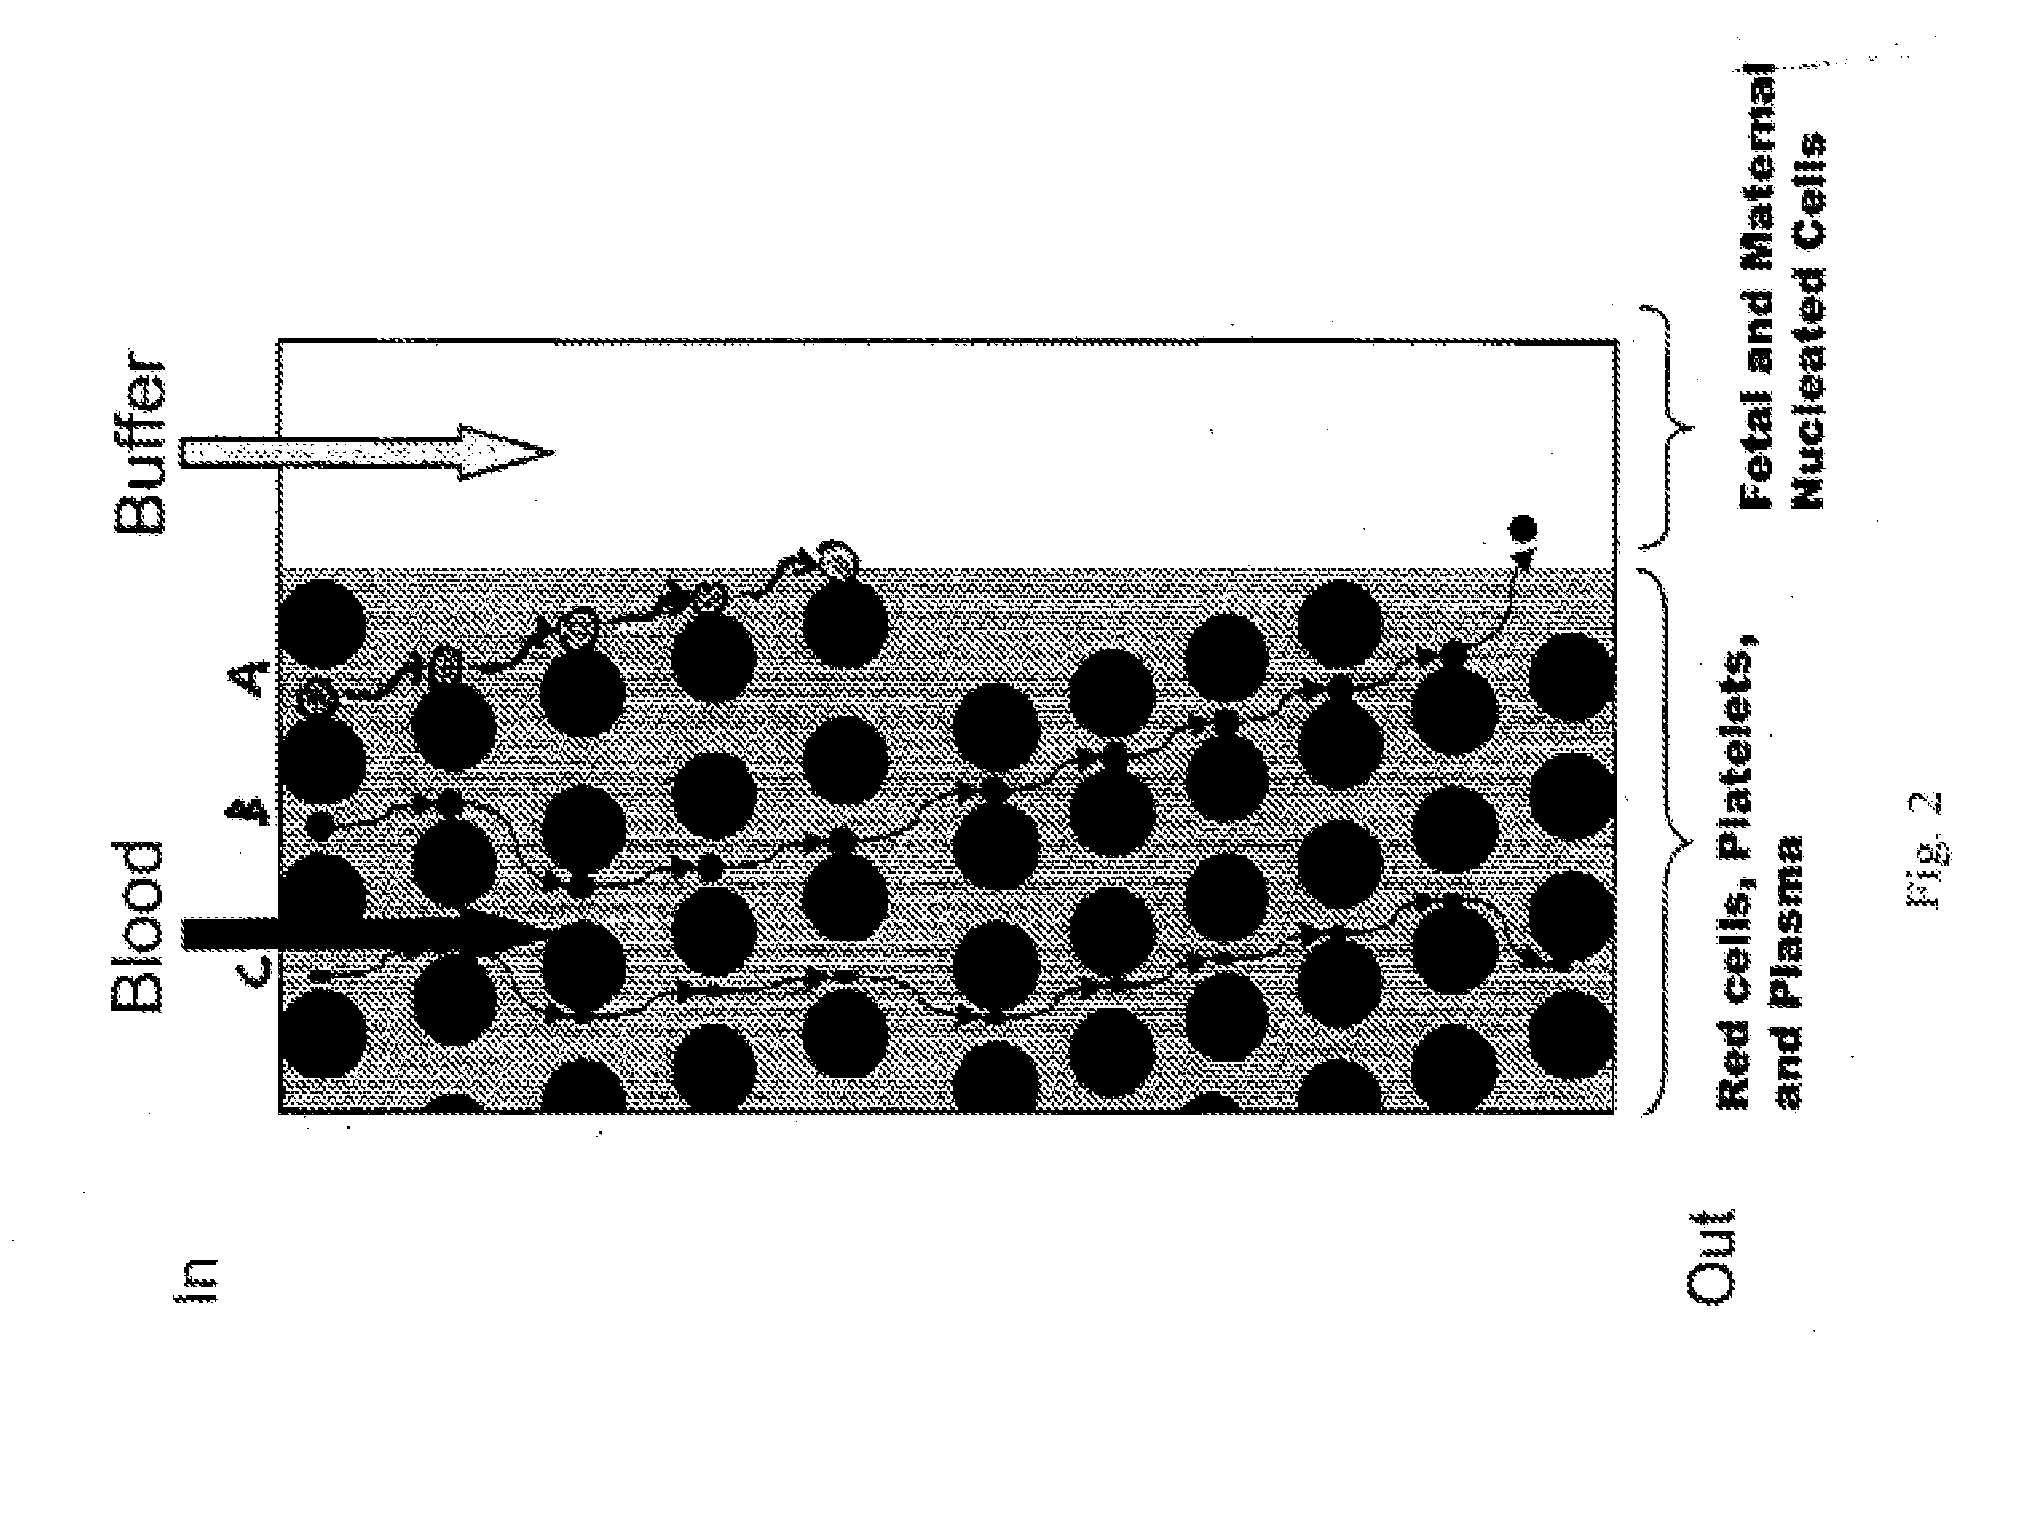 System for cell enrichment